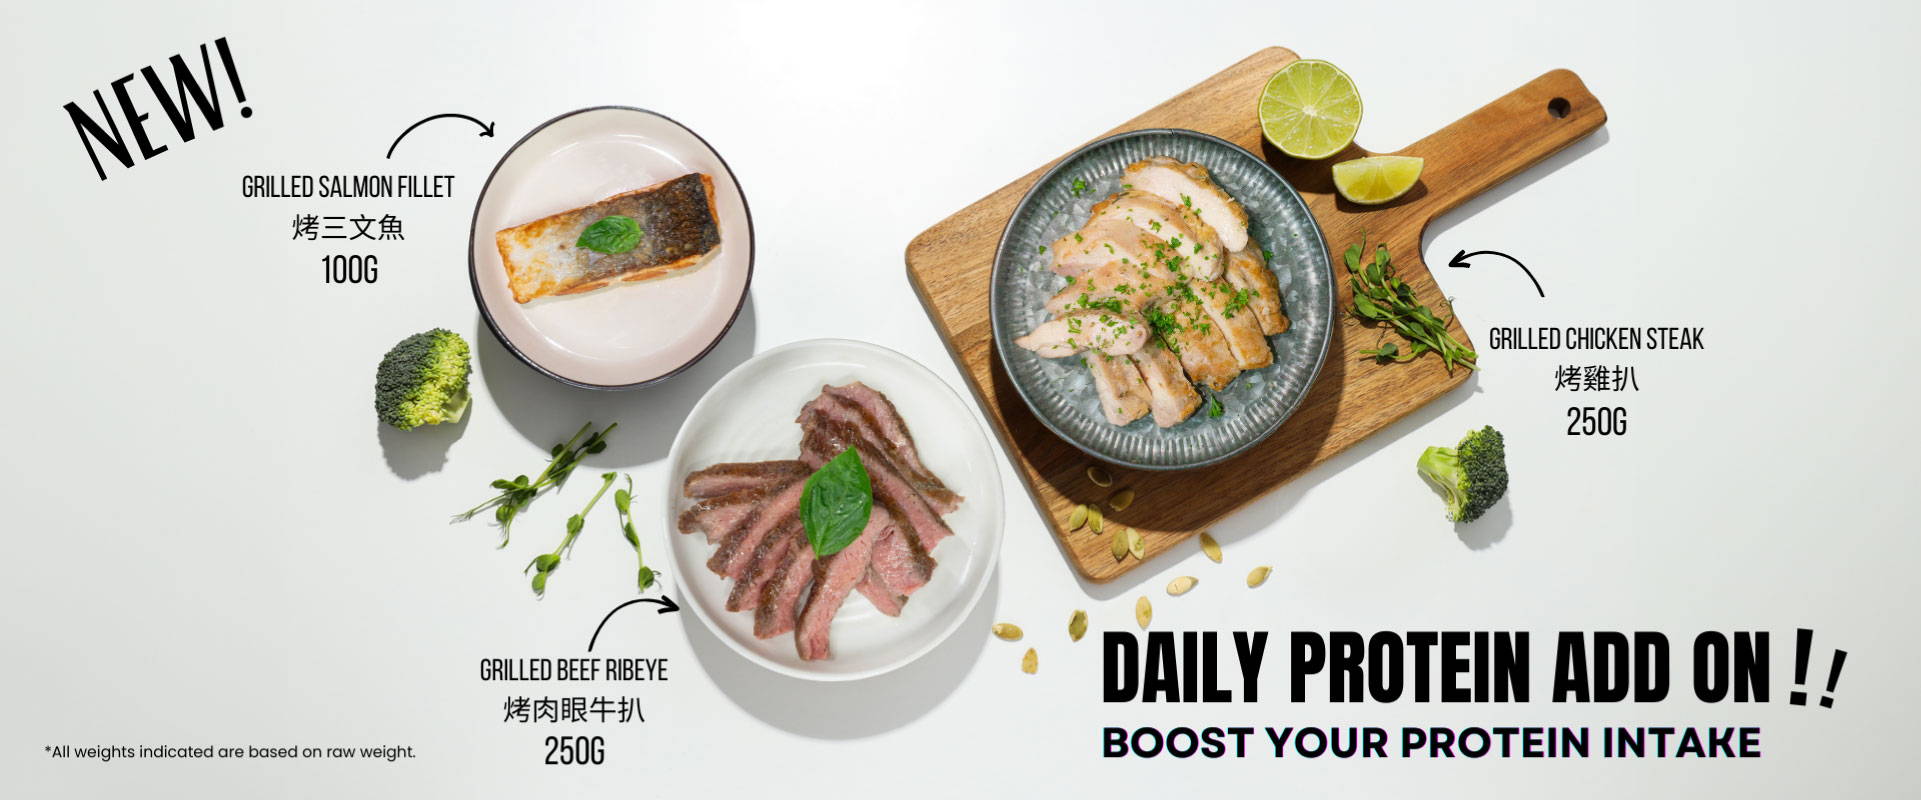 FITTERY new daily protein add on